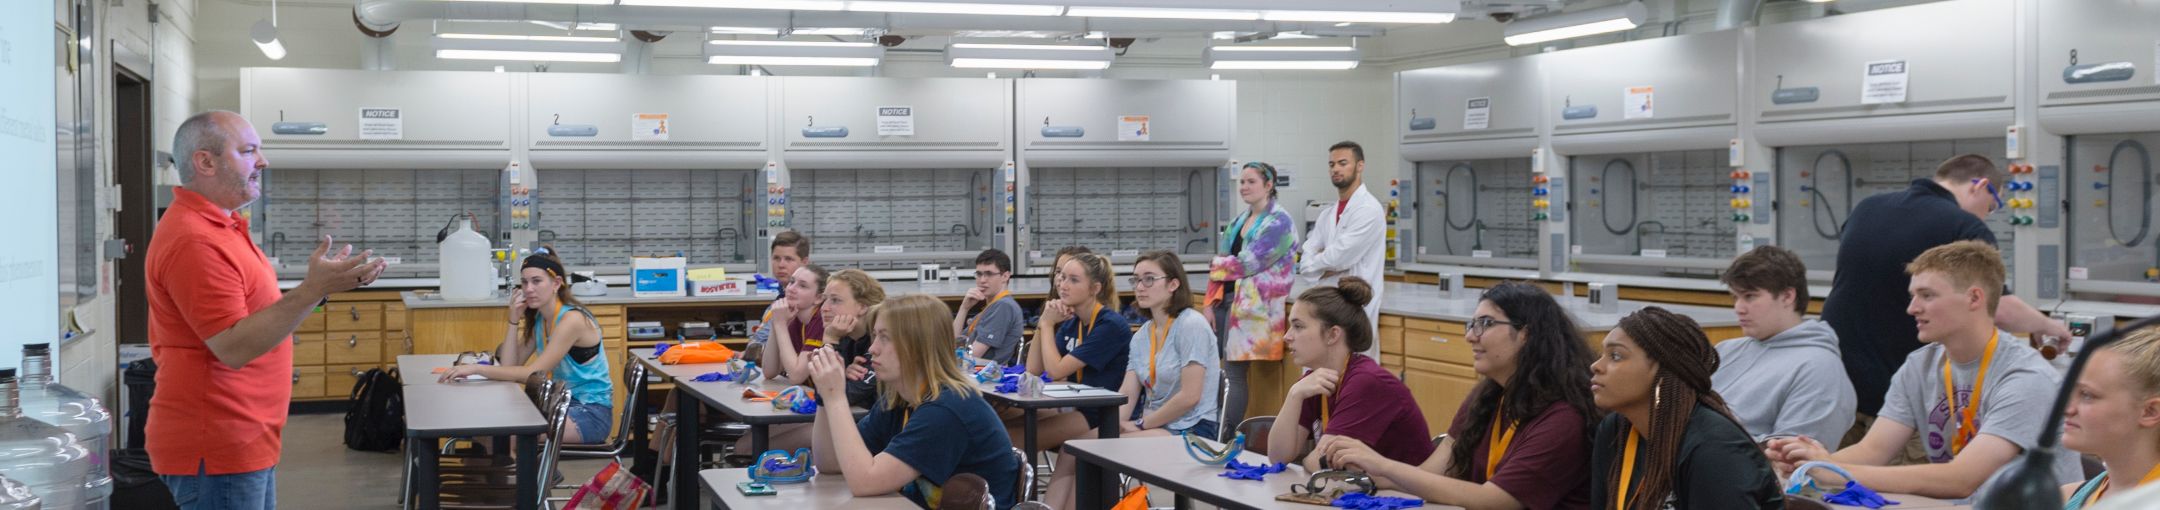 Students attending a lecture in a science lab